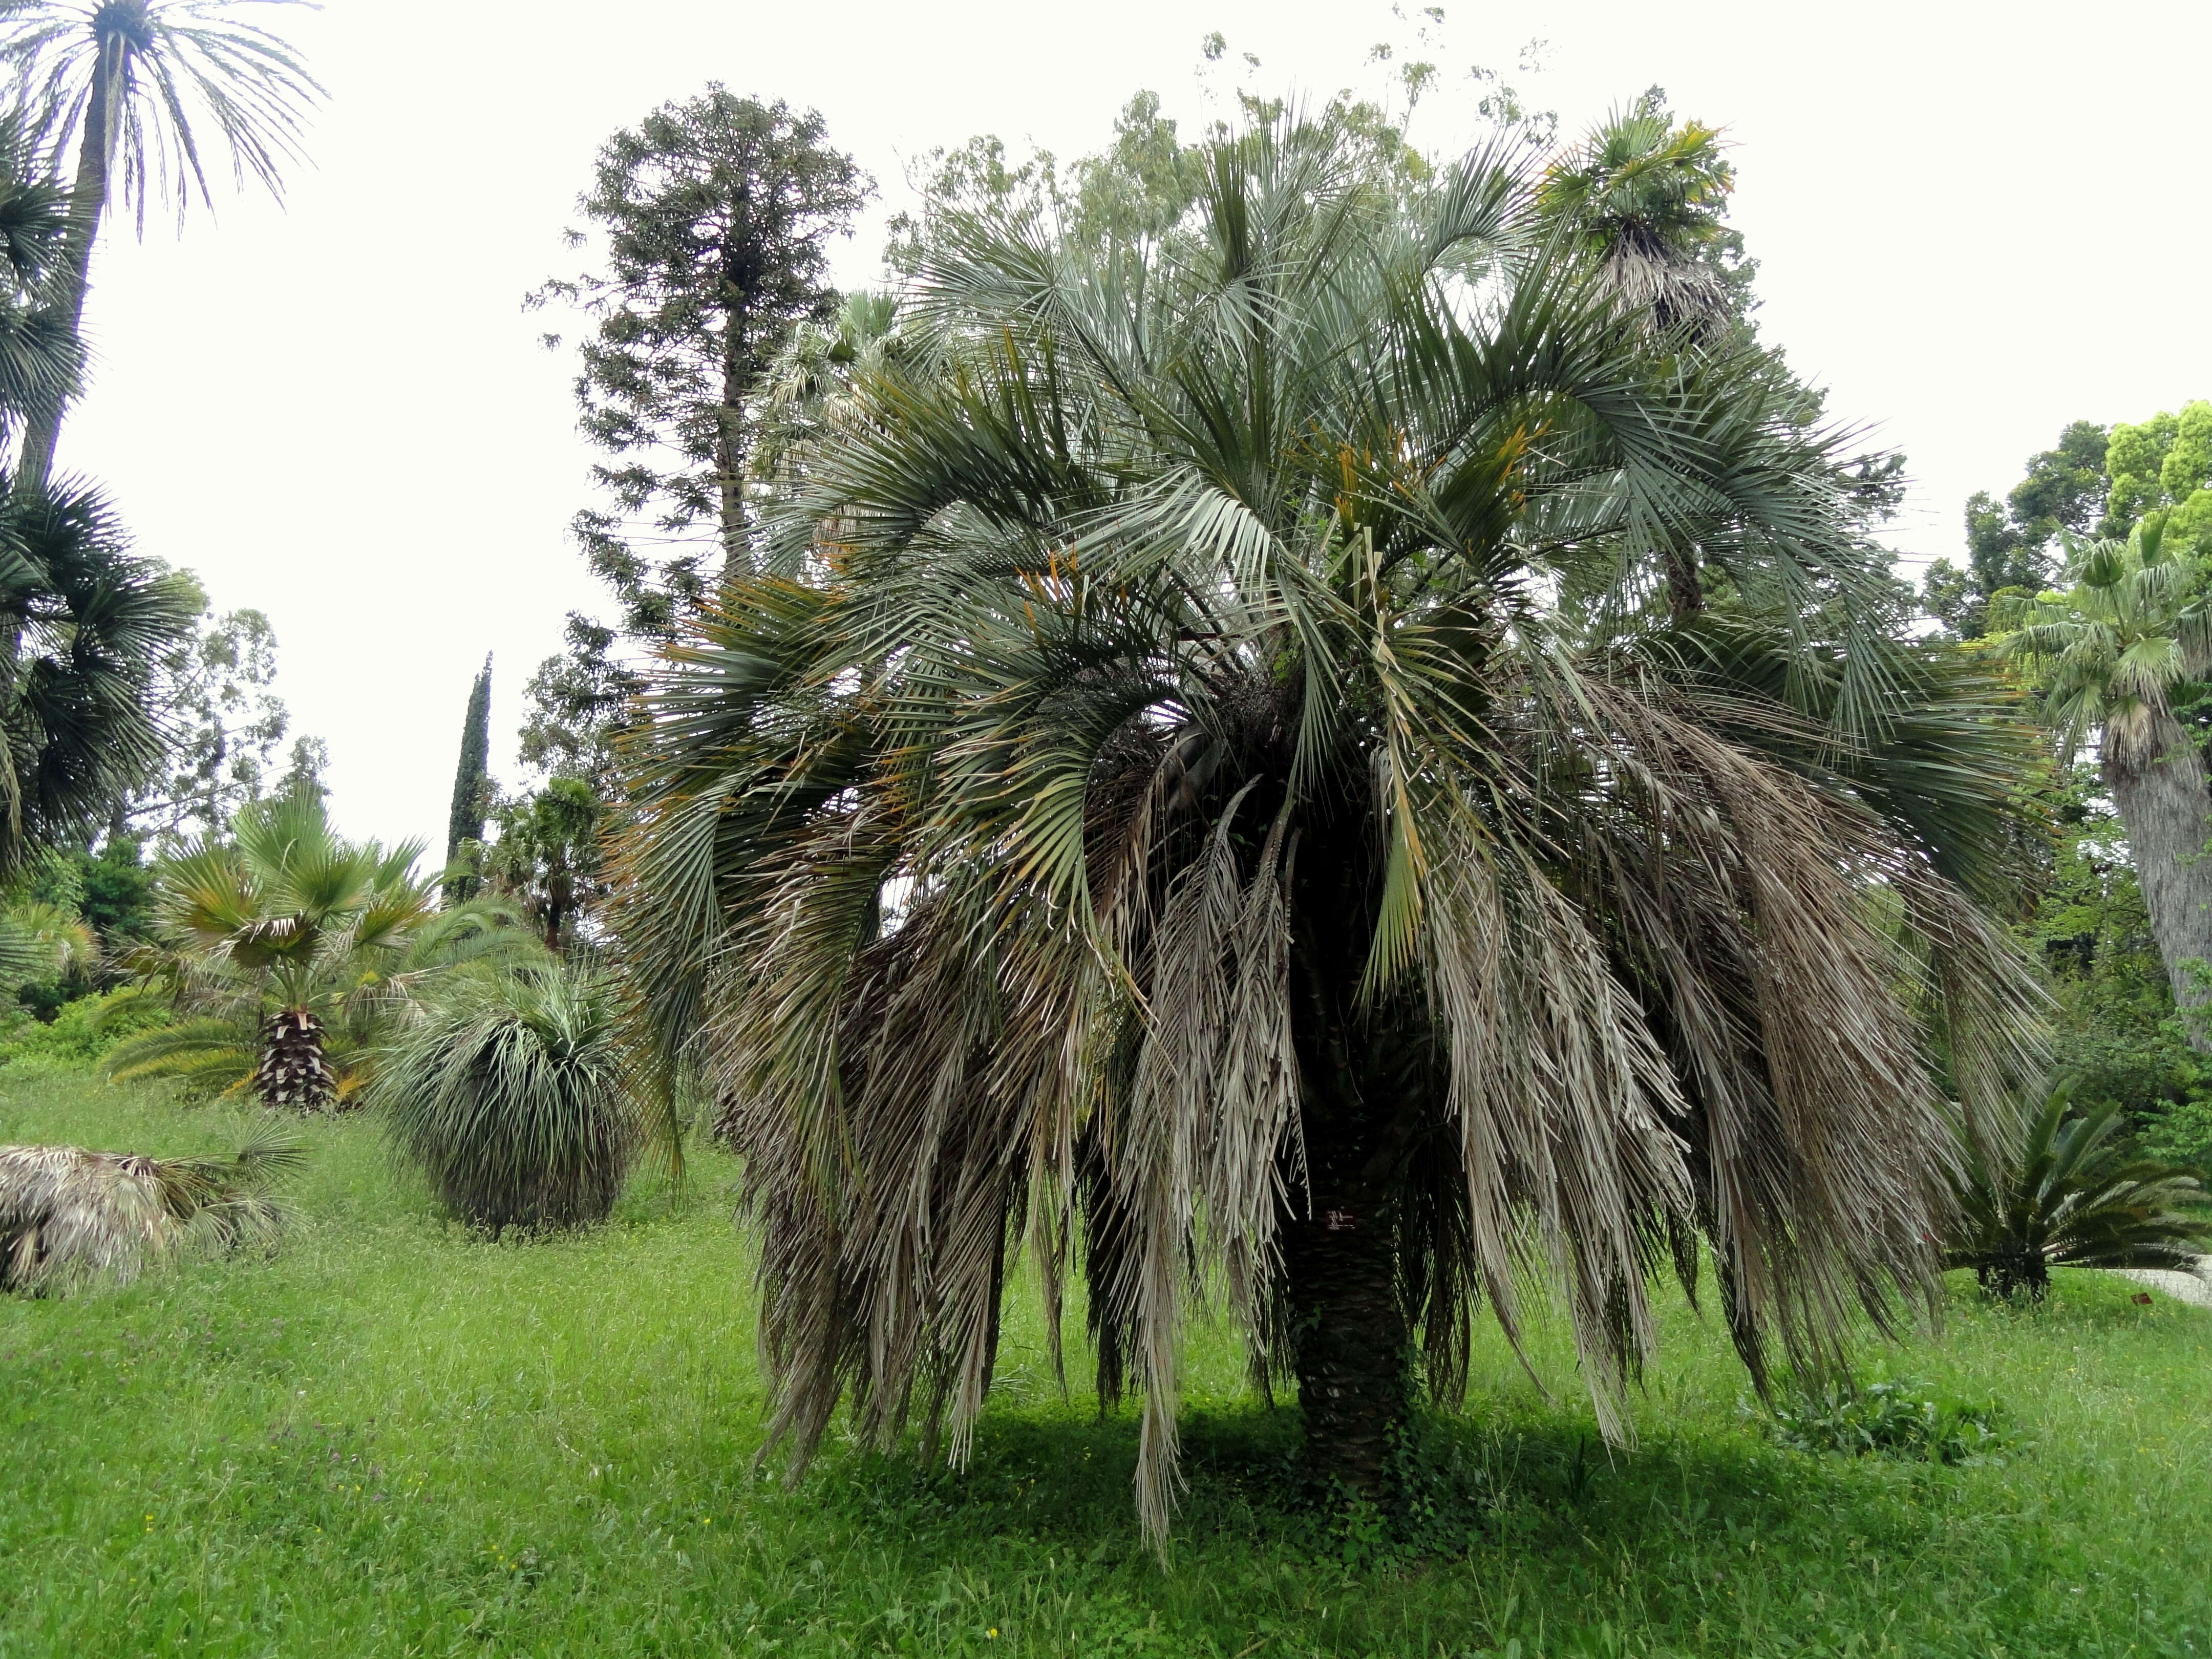 Image of jelly palm